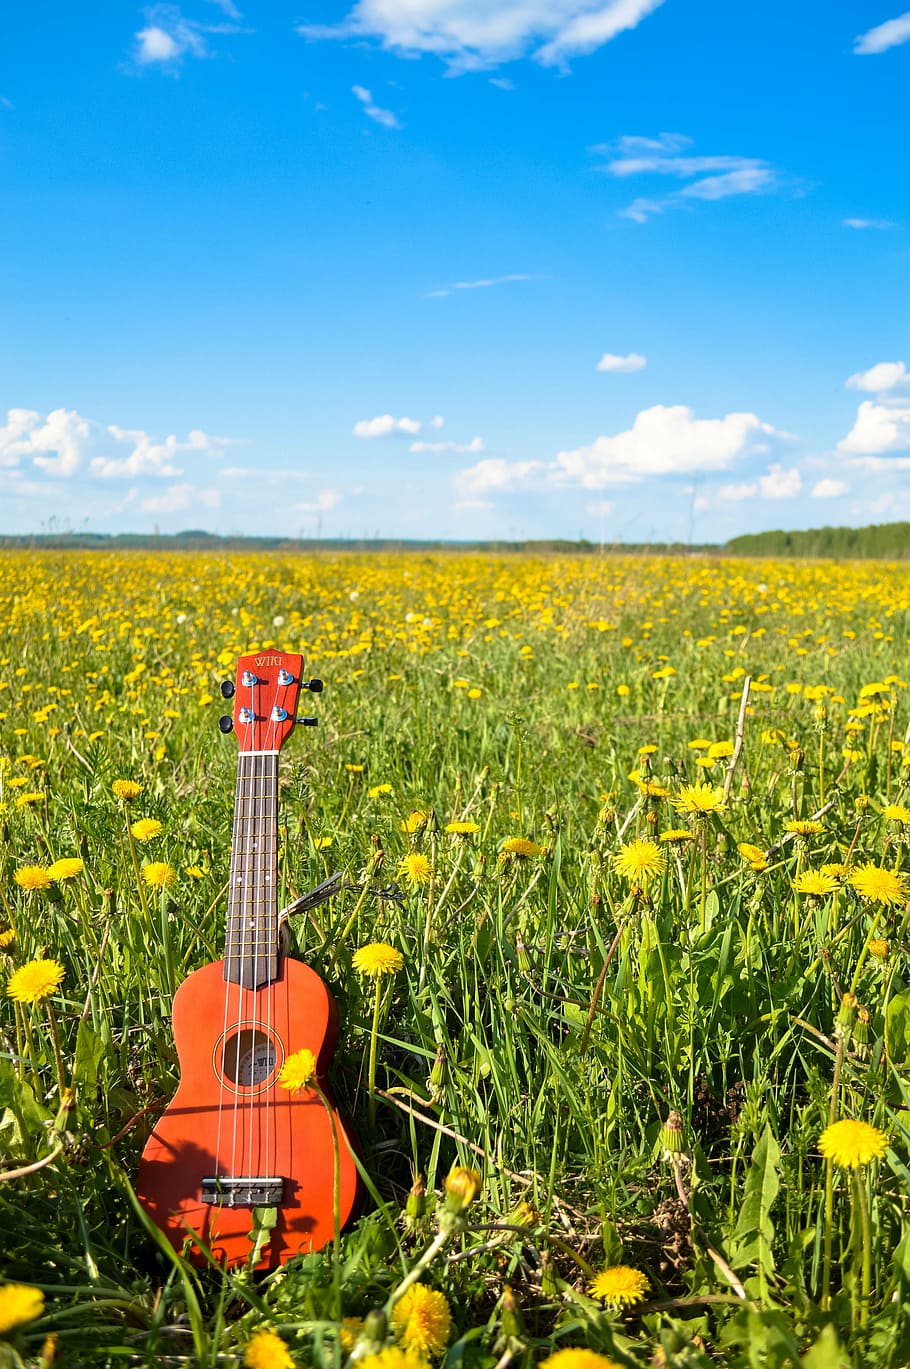 brown ukulele on yellow petaled flower field under blue and white sky during daytime